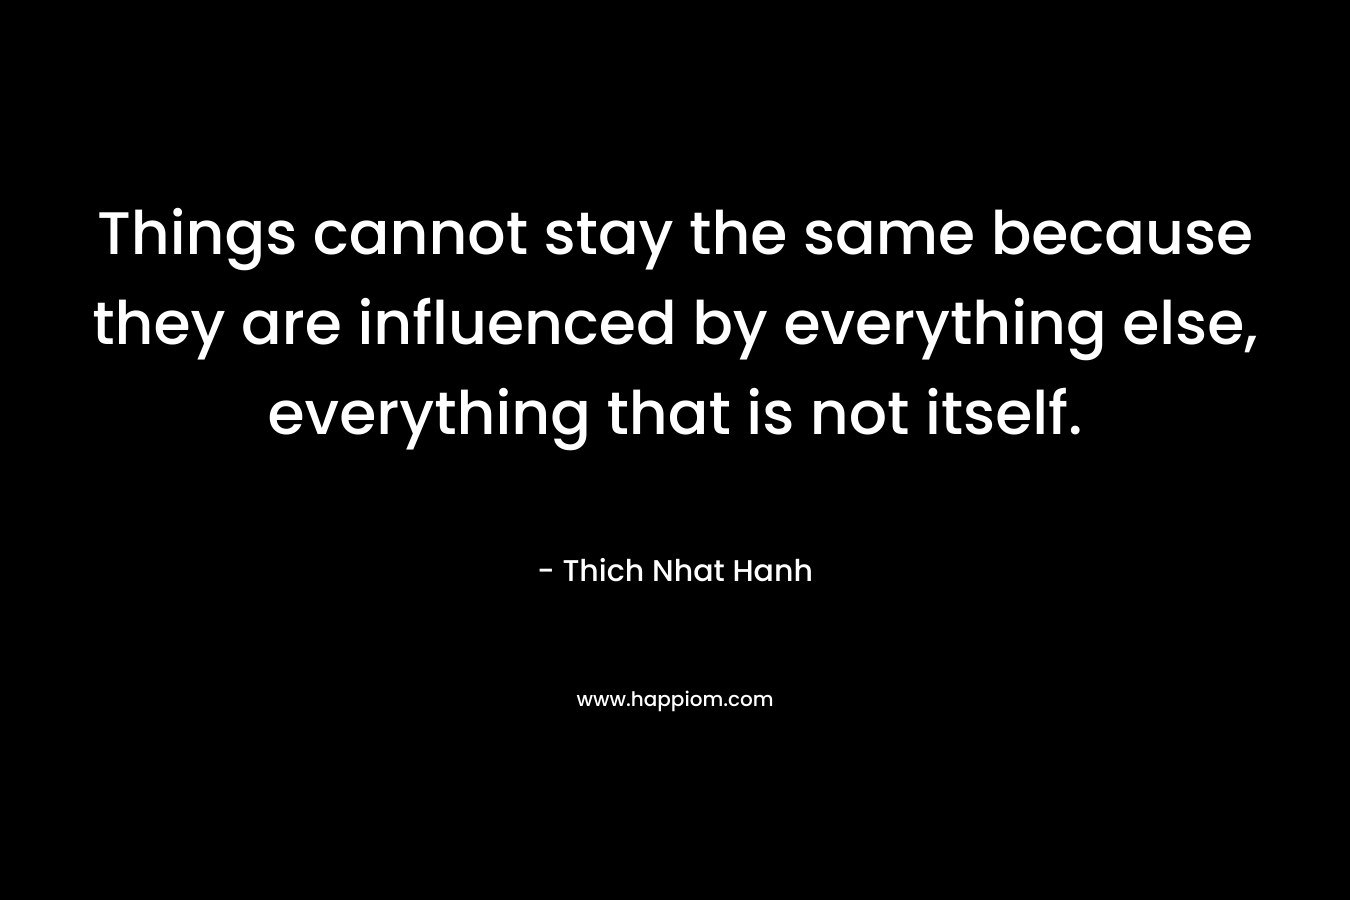 Things cannot stay the same because they are influenced by everything else, everything that is not itself.